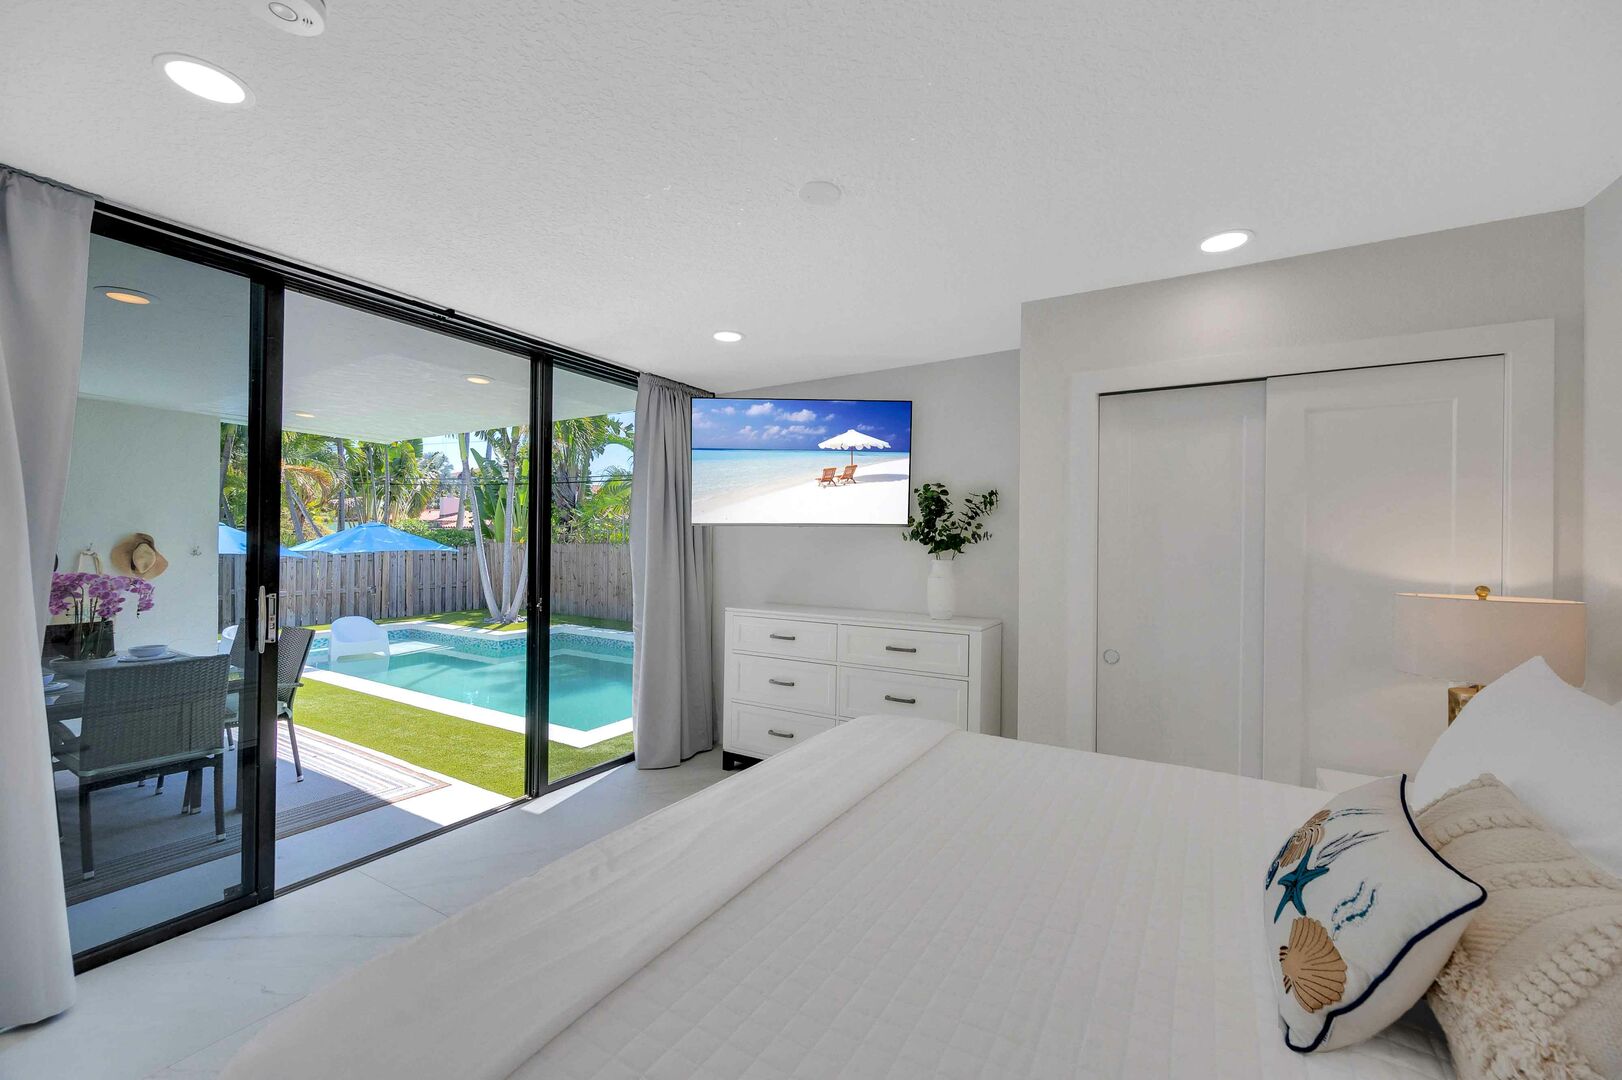 Bedroom two displays a king bed, smart TV and a glass doors to the backyard and pool.